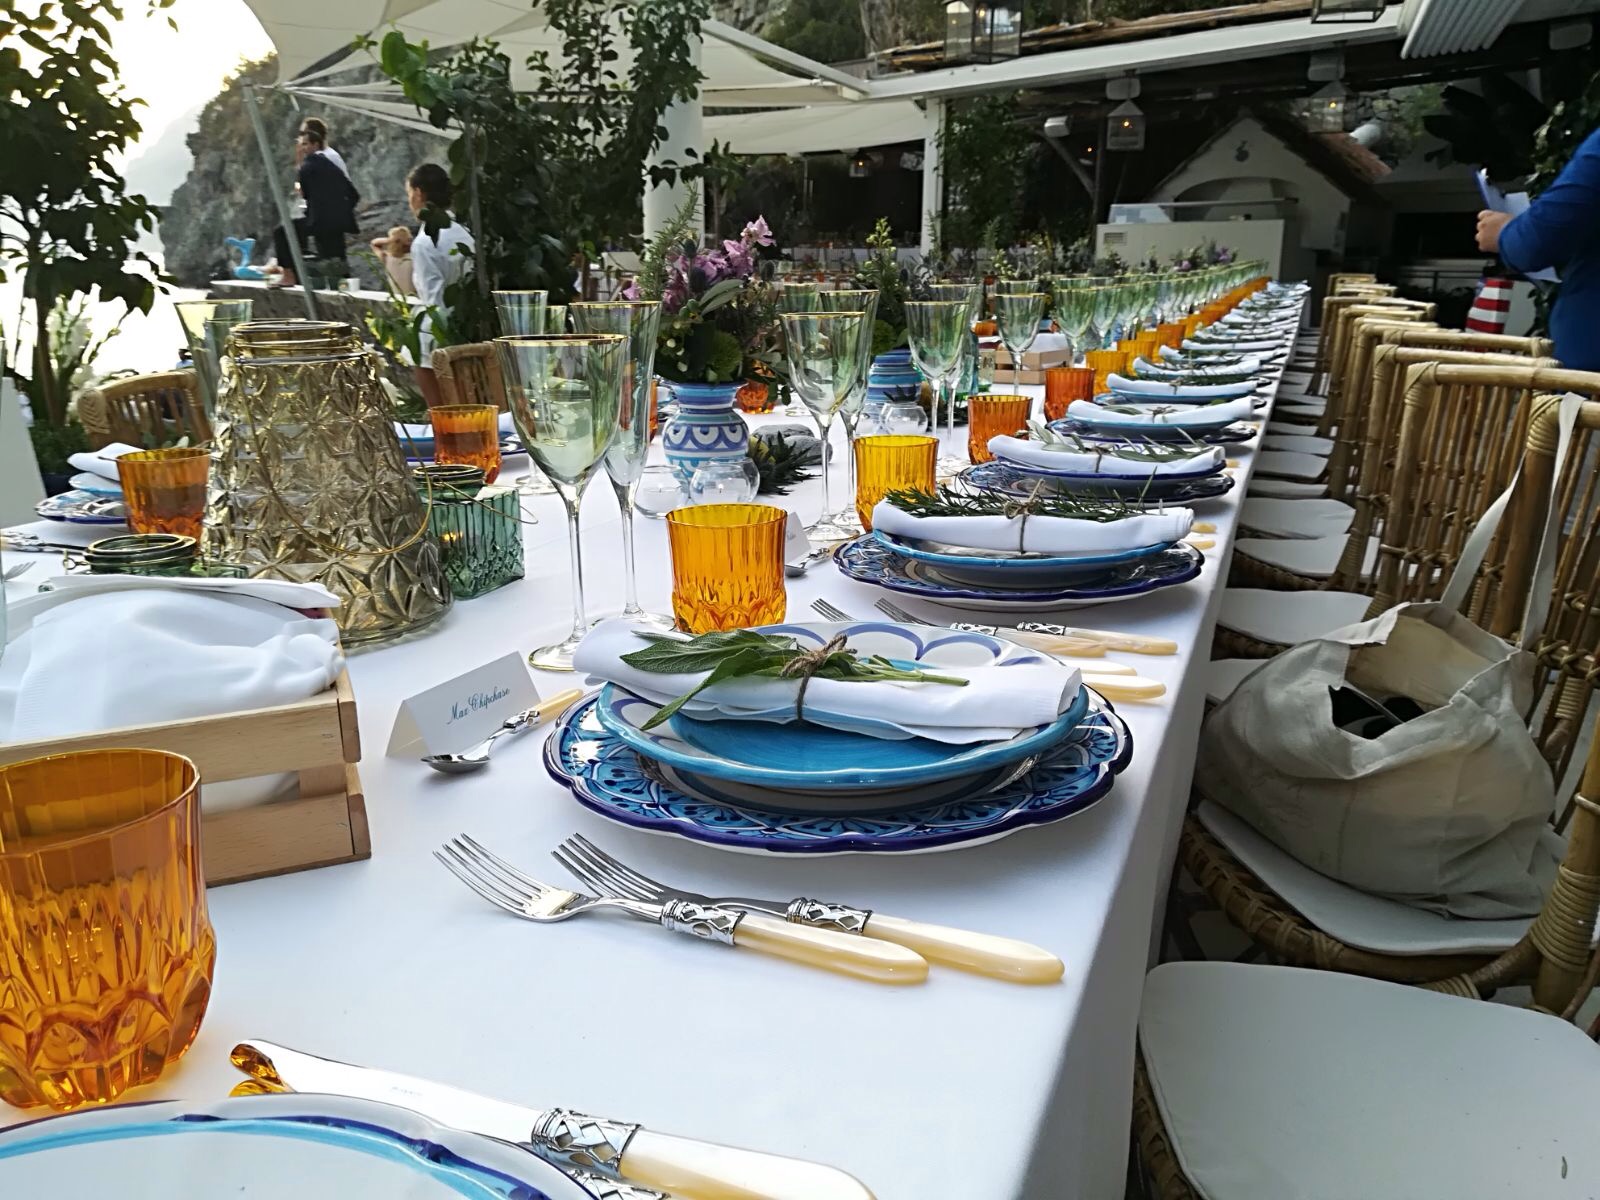 https://www.weddingamalfi.com/wp-content/uploads/Anna-and-Charles-wedding-table-colorful-decorations-complete.jpg